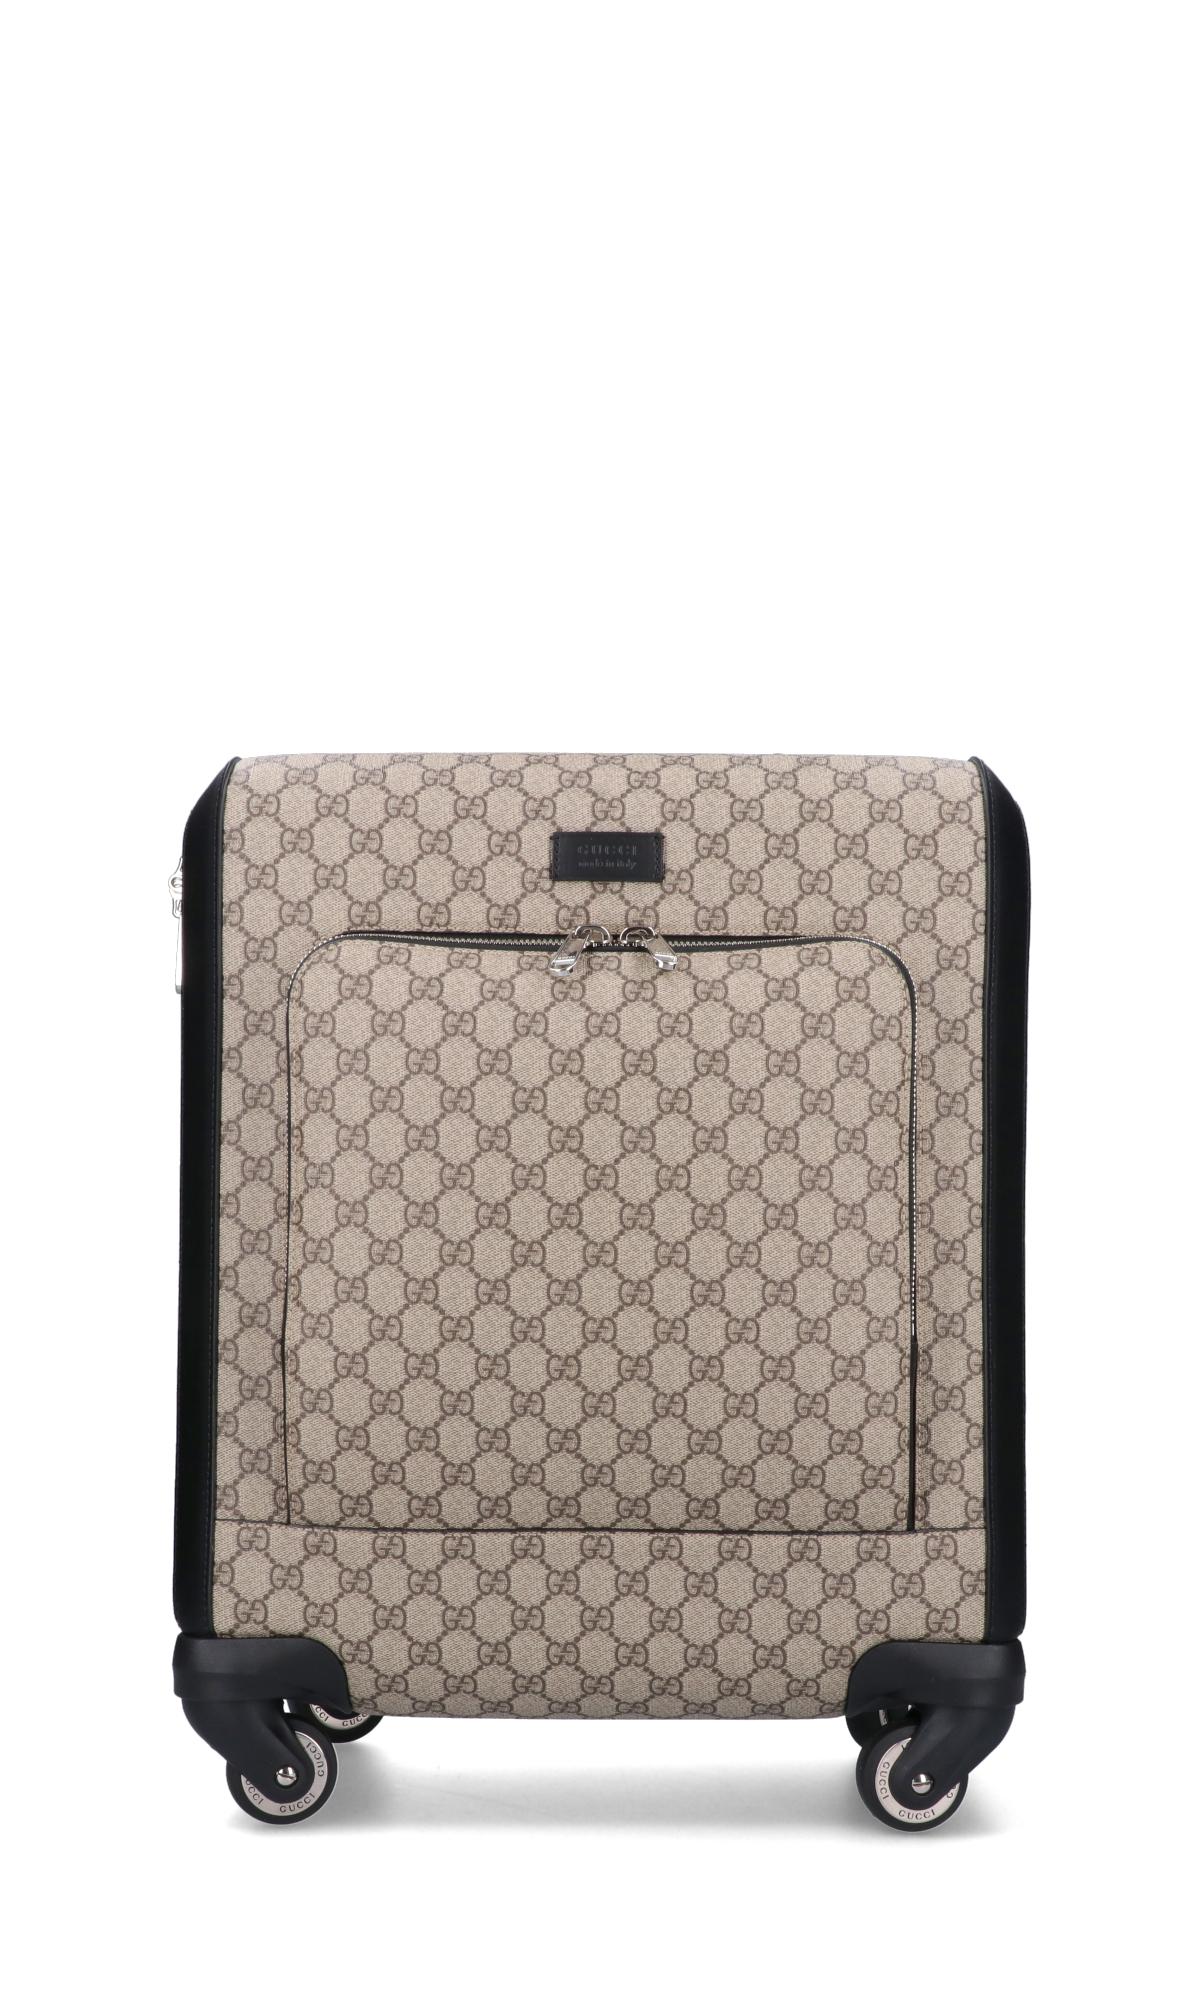 Ophidia GG medium trolley in grey and black Supreme